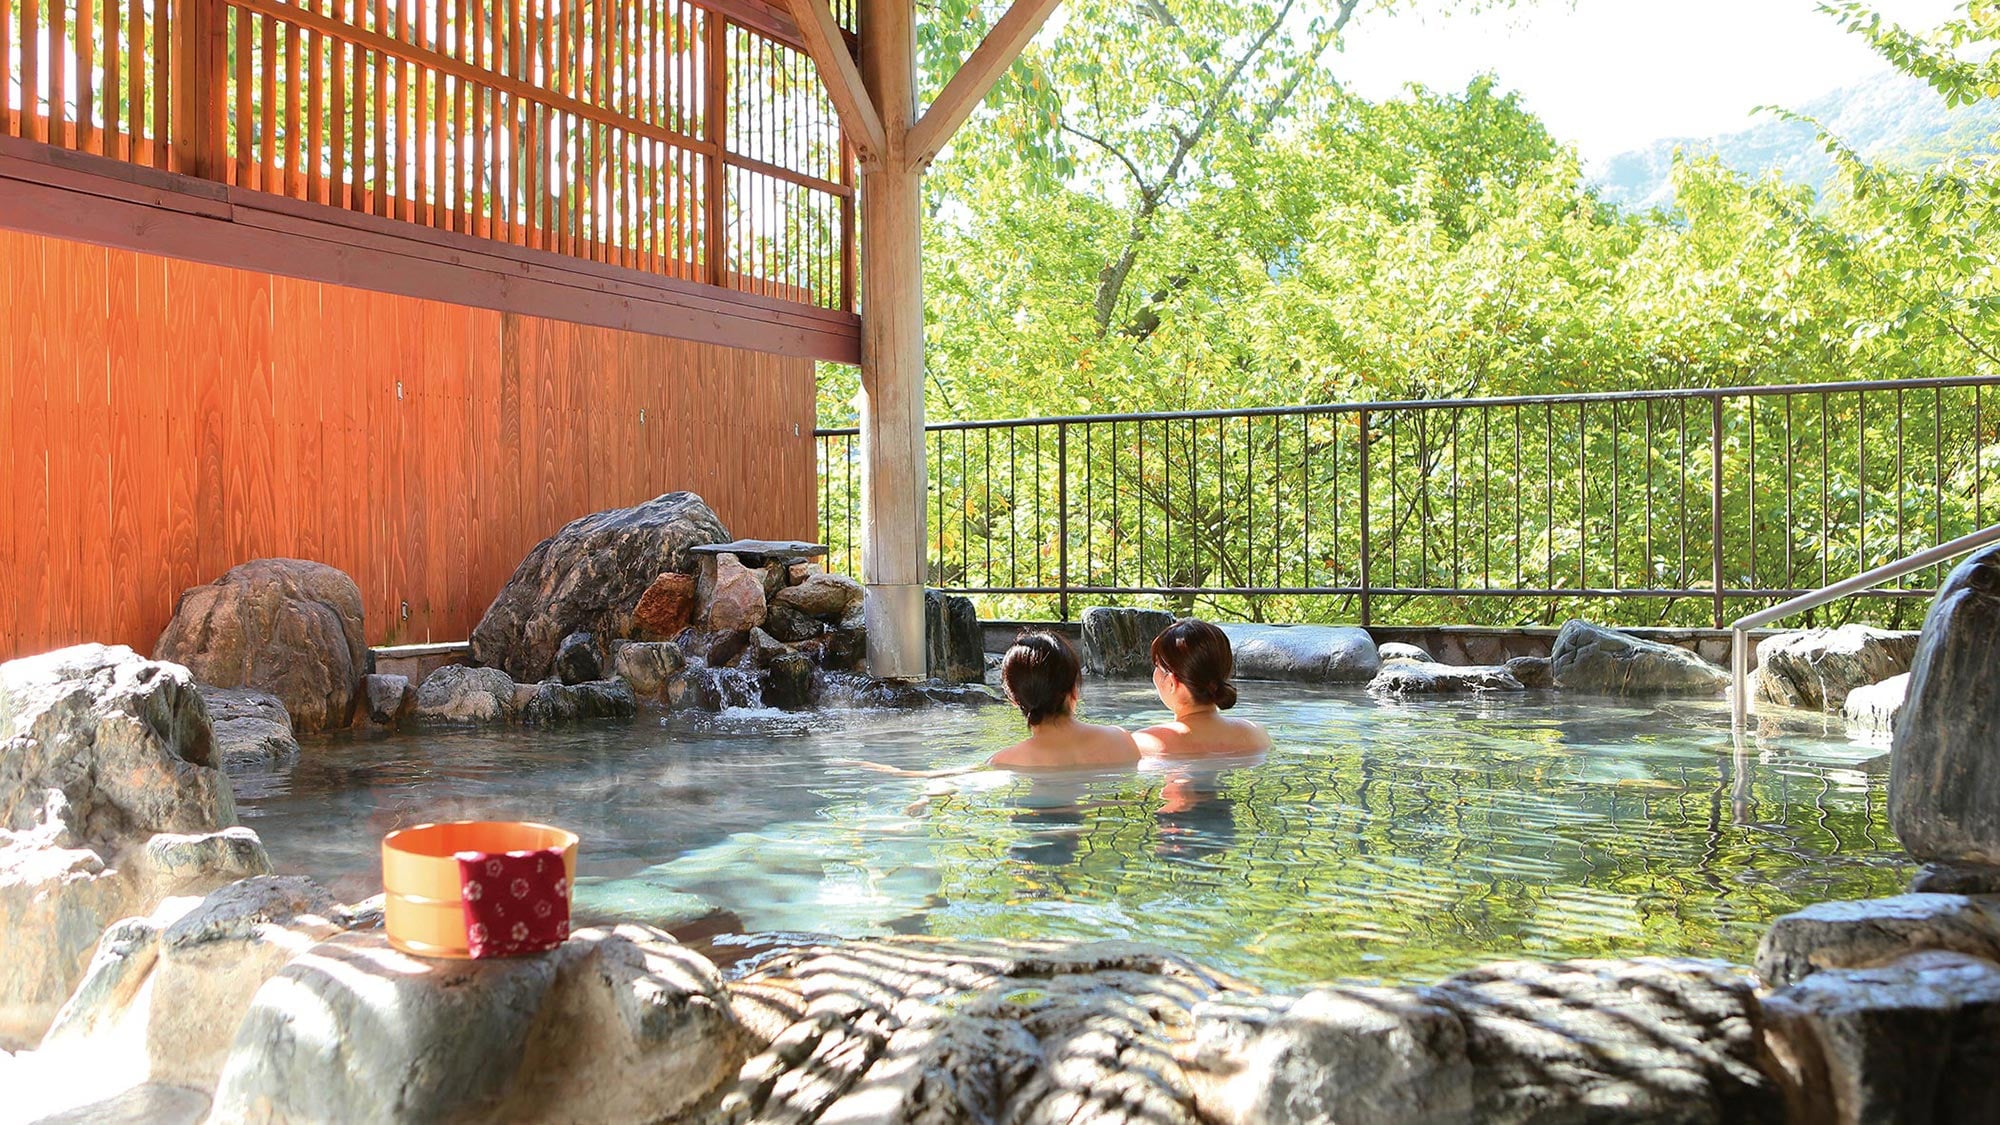 Kinugawa Onsen, a famous hot spring that opened 330 years ago